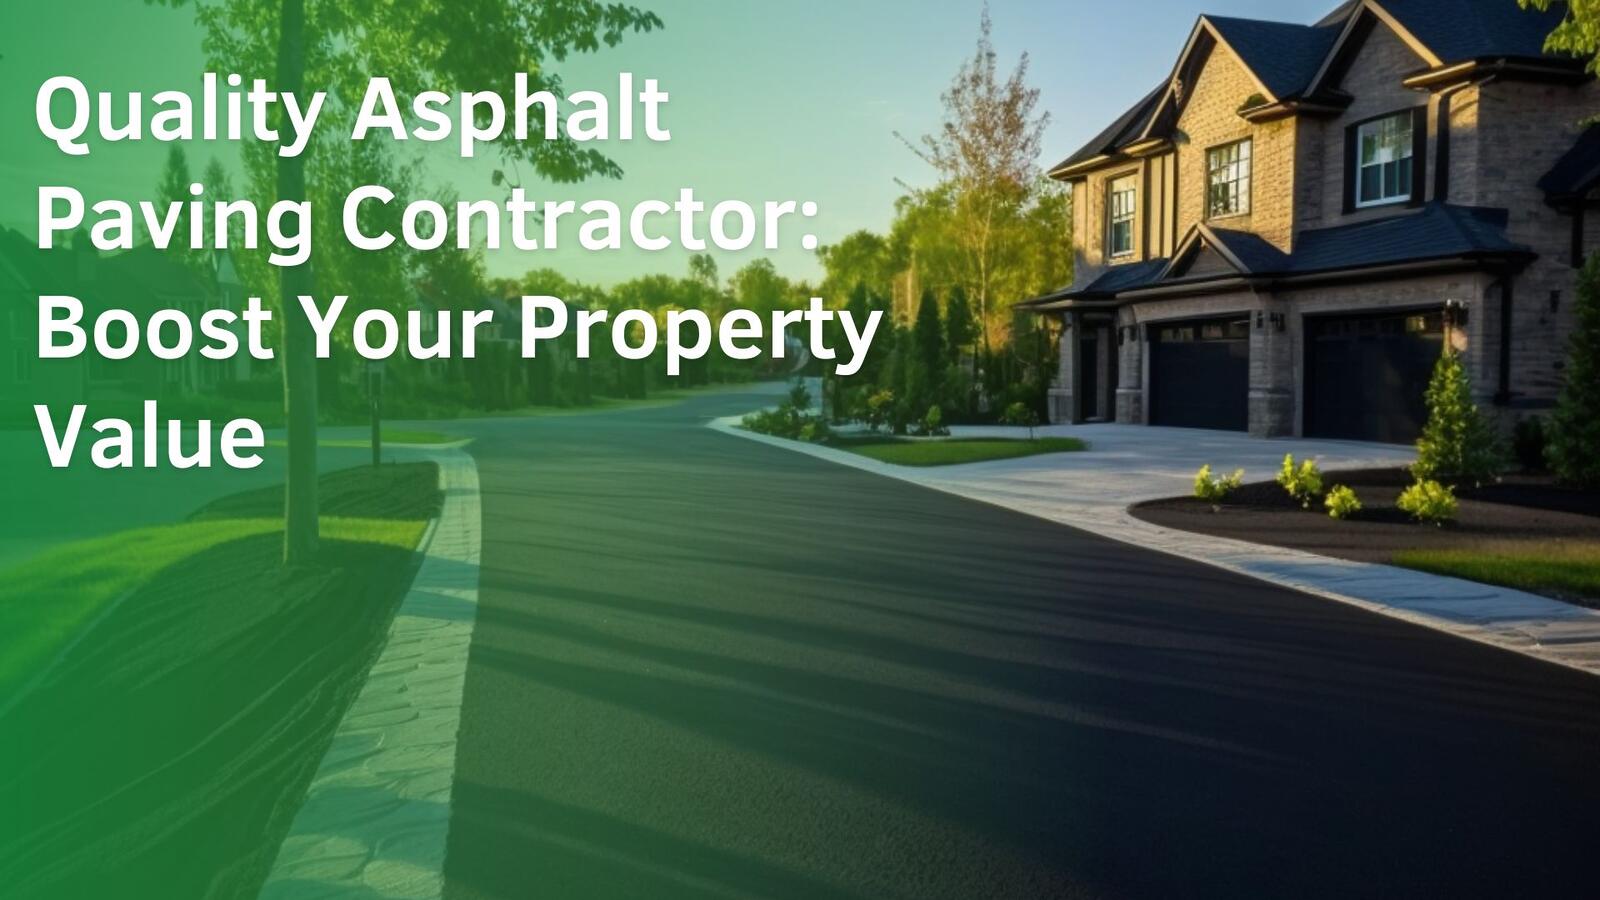 Transform Your Property with the Right Asphalt Paving Contractor